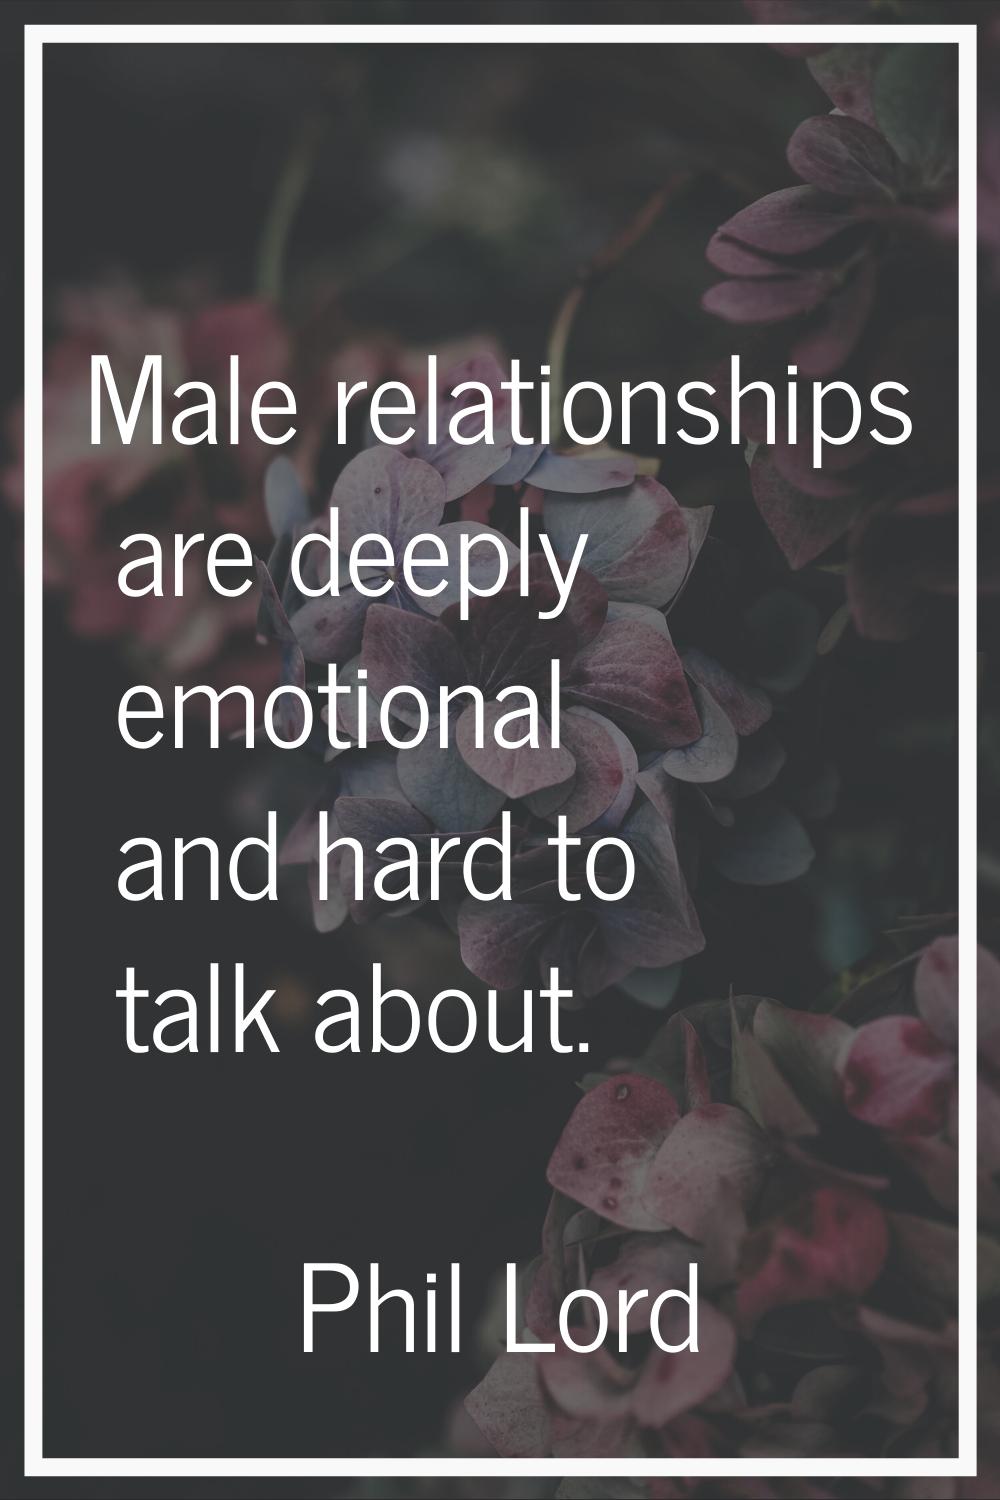 Male relationships are deeply emotional and hard to talk about.